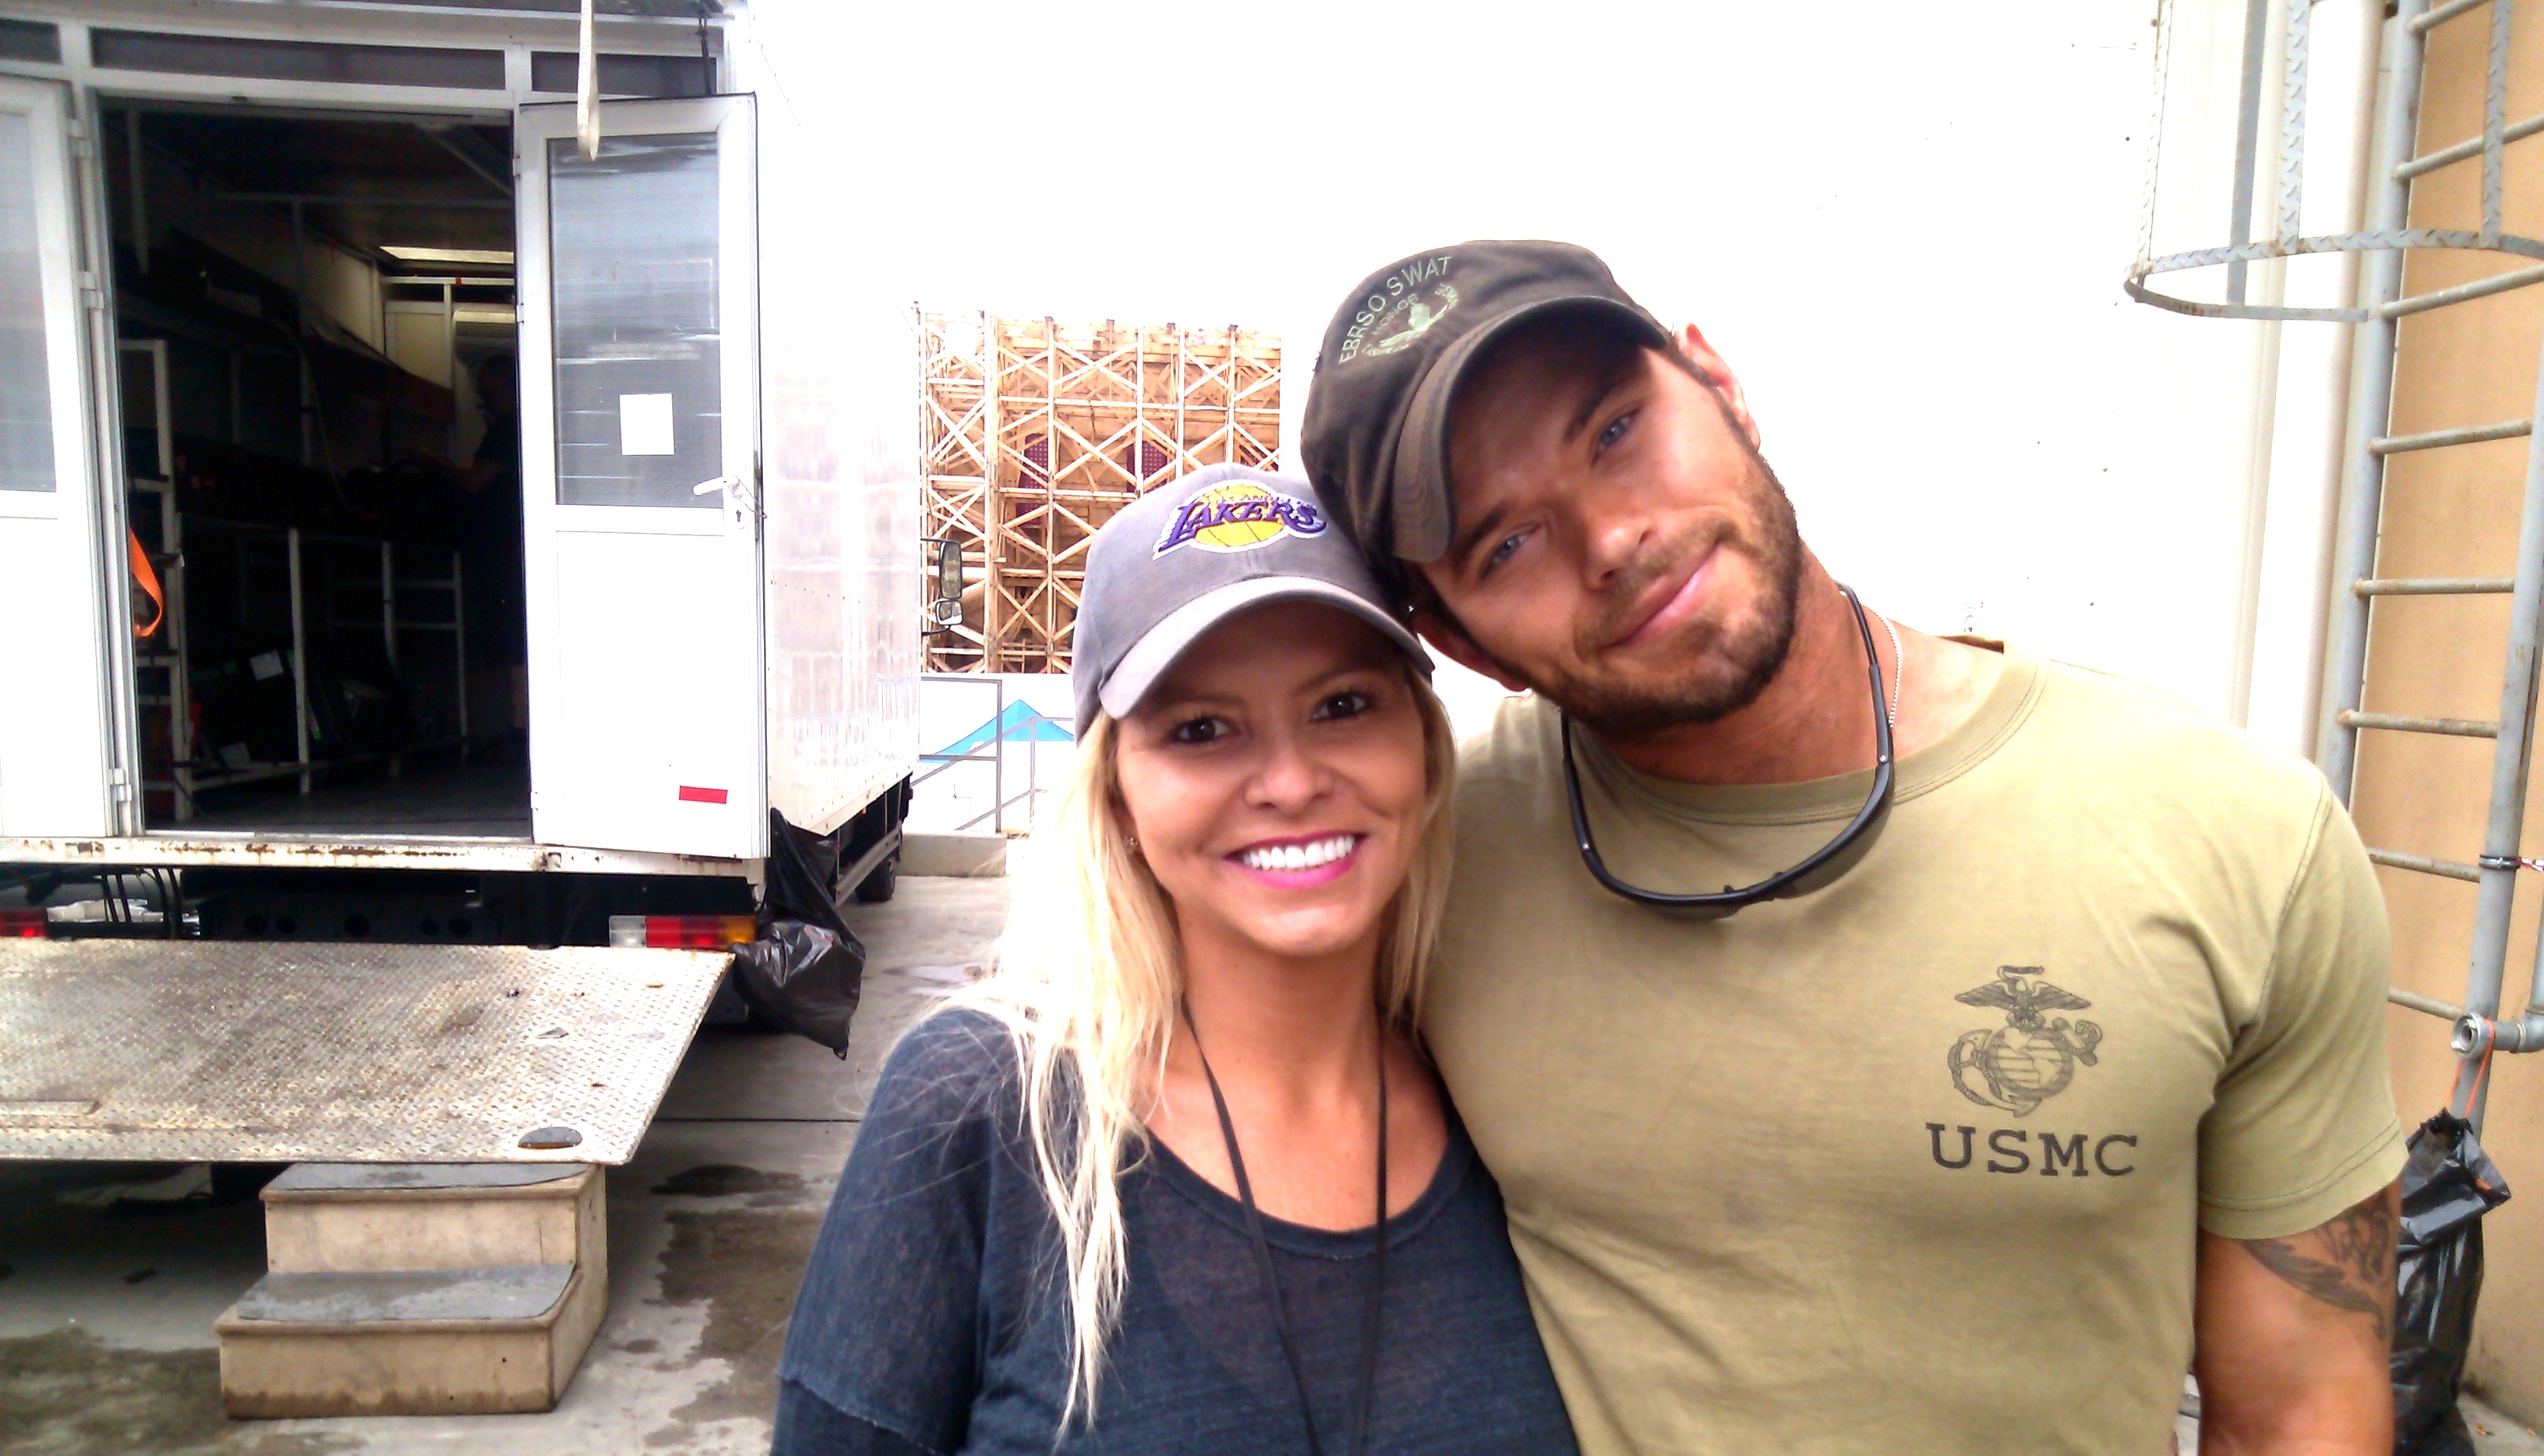 Katrin Benedikt and Kellan Lutz on the set of The Expendables 3 in Sofia, Bulgaria on September 13, 2013.